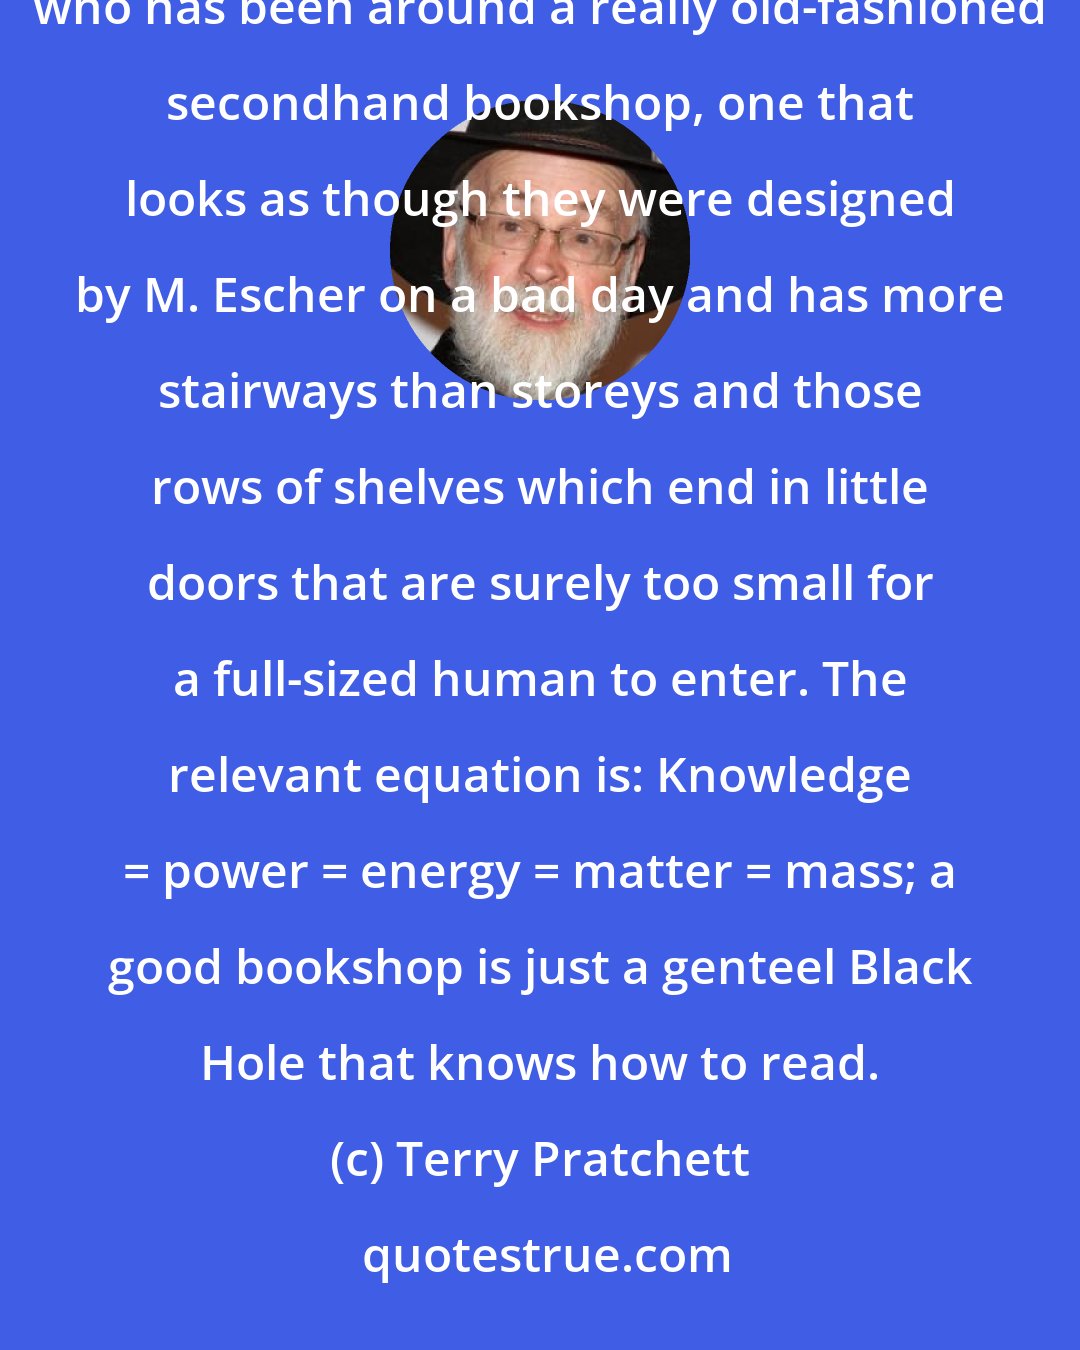 Terry Pratchett: The truth is that even big collections of ordinary books distort space, as can readily be proved by anyone who has been around a really old-fashioned secondhand bookshop, one that looks as though they were designed by M. Escher on a bad day and has more stairways than storeys and those rows of shelves which end in little doors that are surely too small for a full-sized human to enter. The relevant equation is: Knowledge = power = energy = matter = mass; a good bookshop is just a genteel Black Hole that knows how to read.